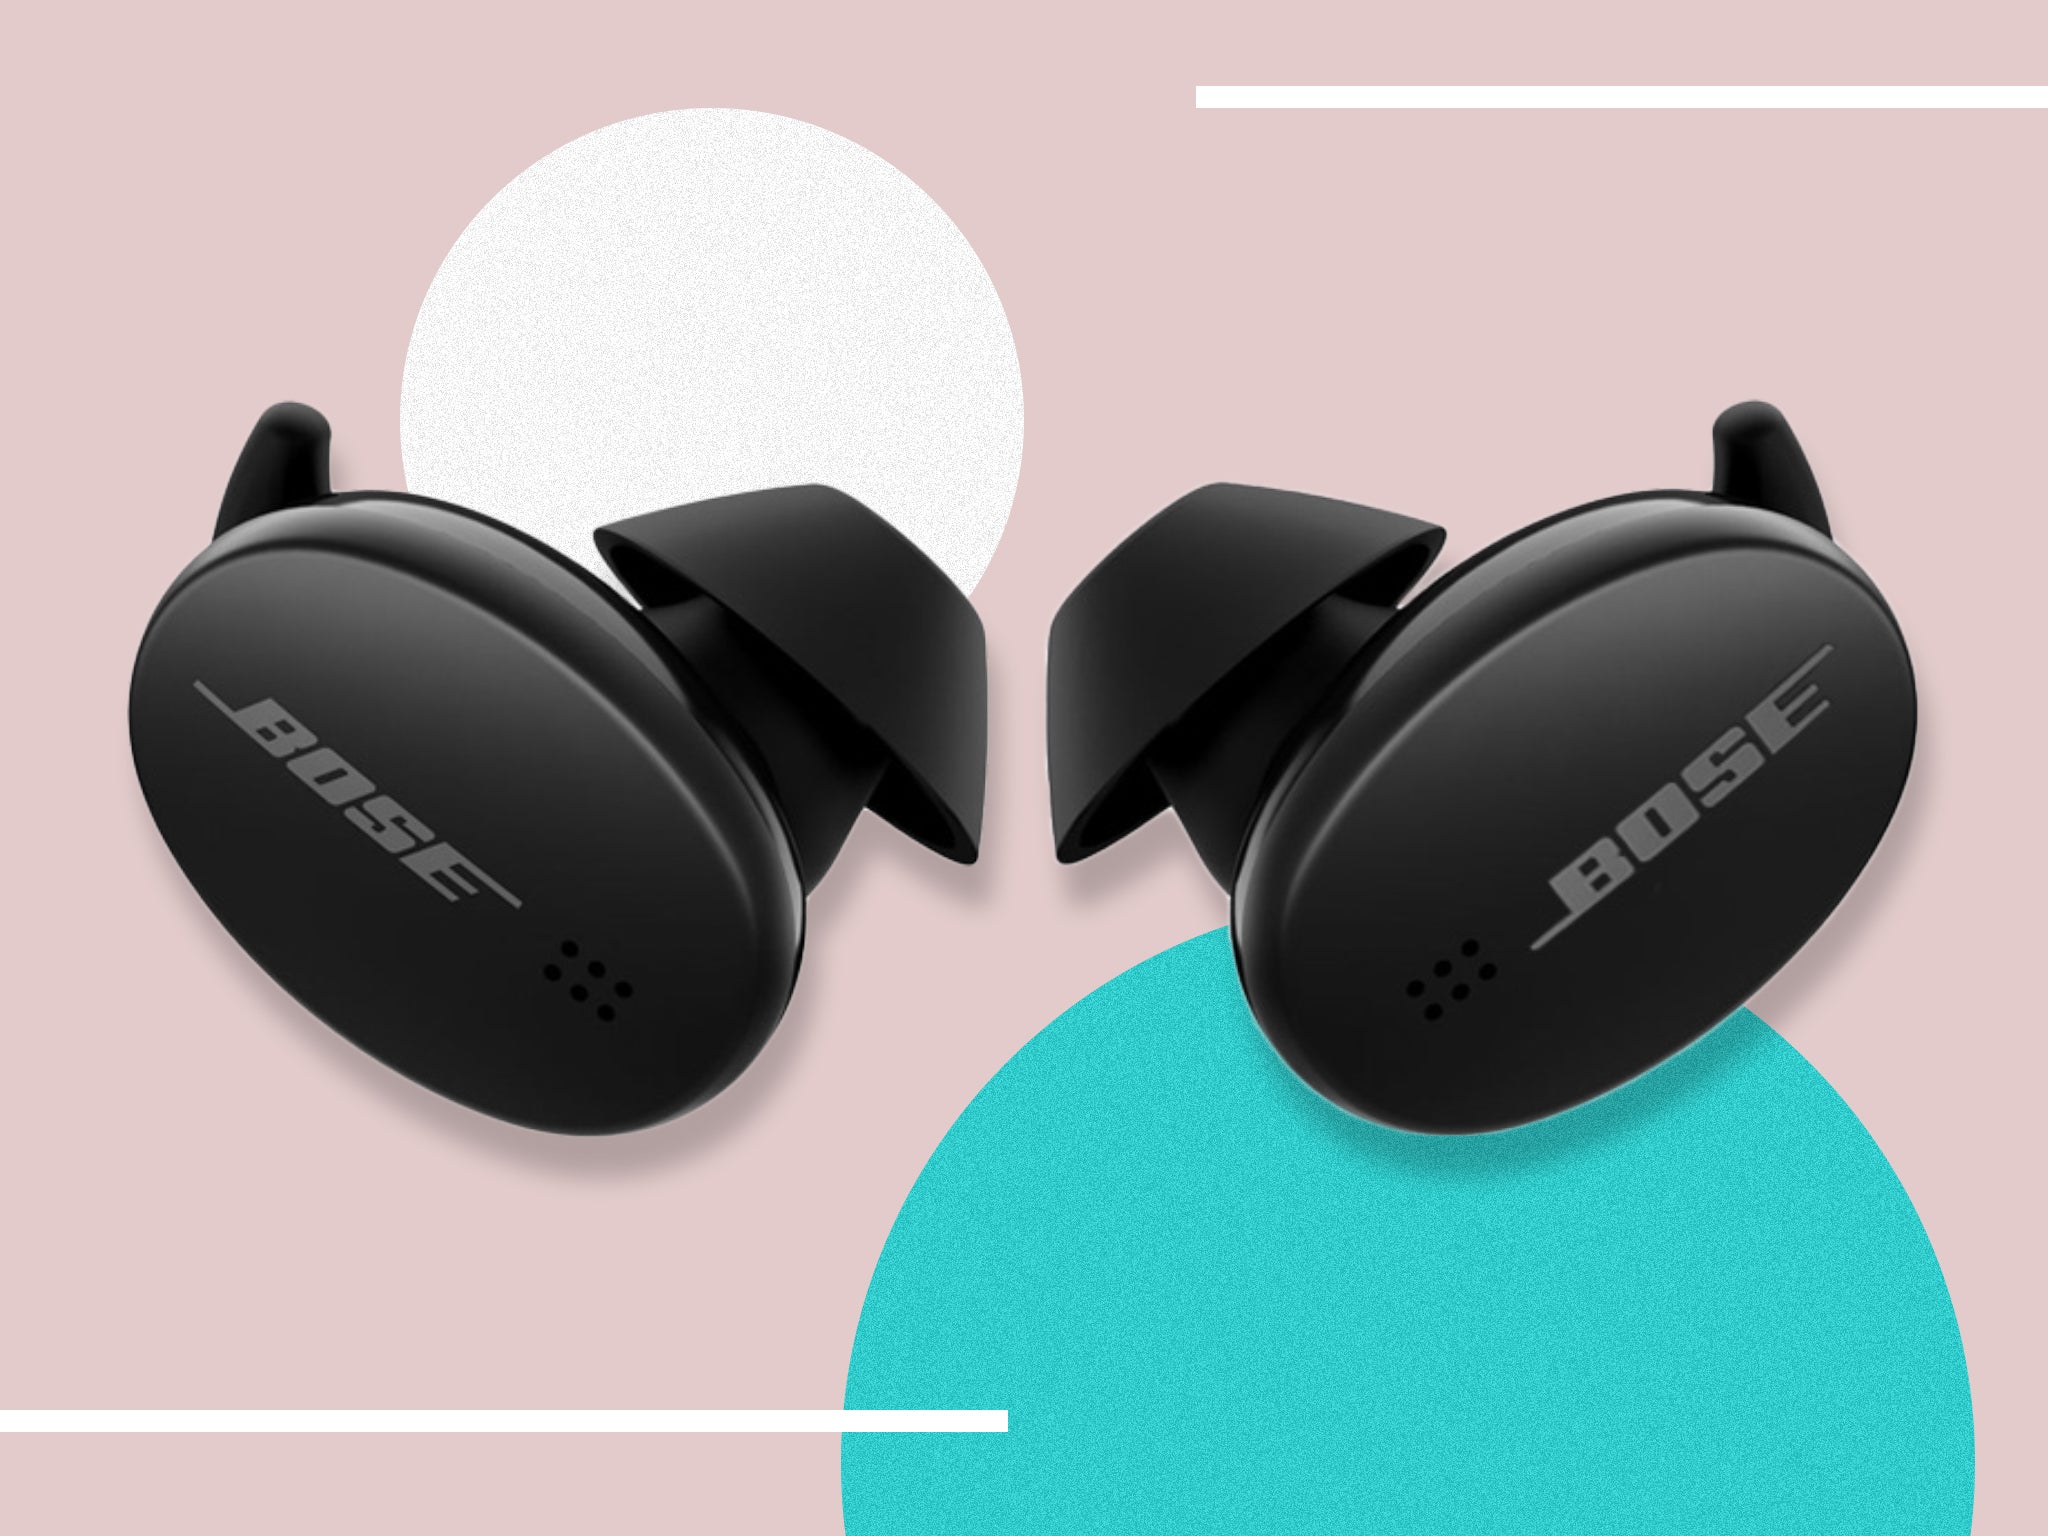 The brand is renowned for its noise-cancelling tech